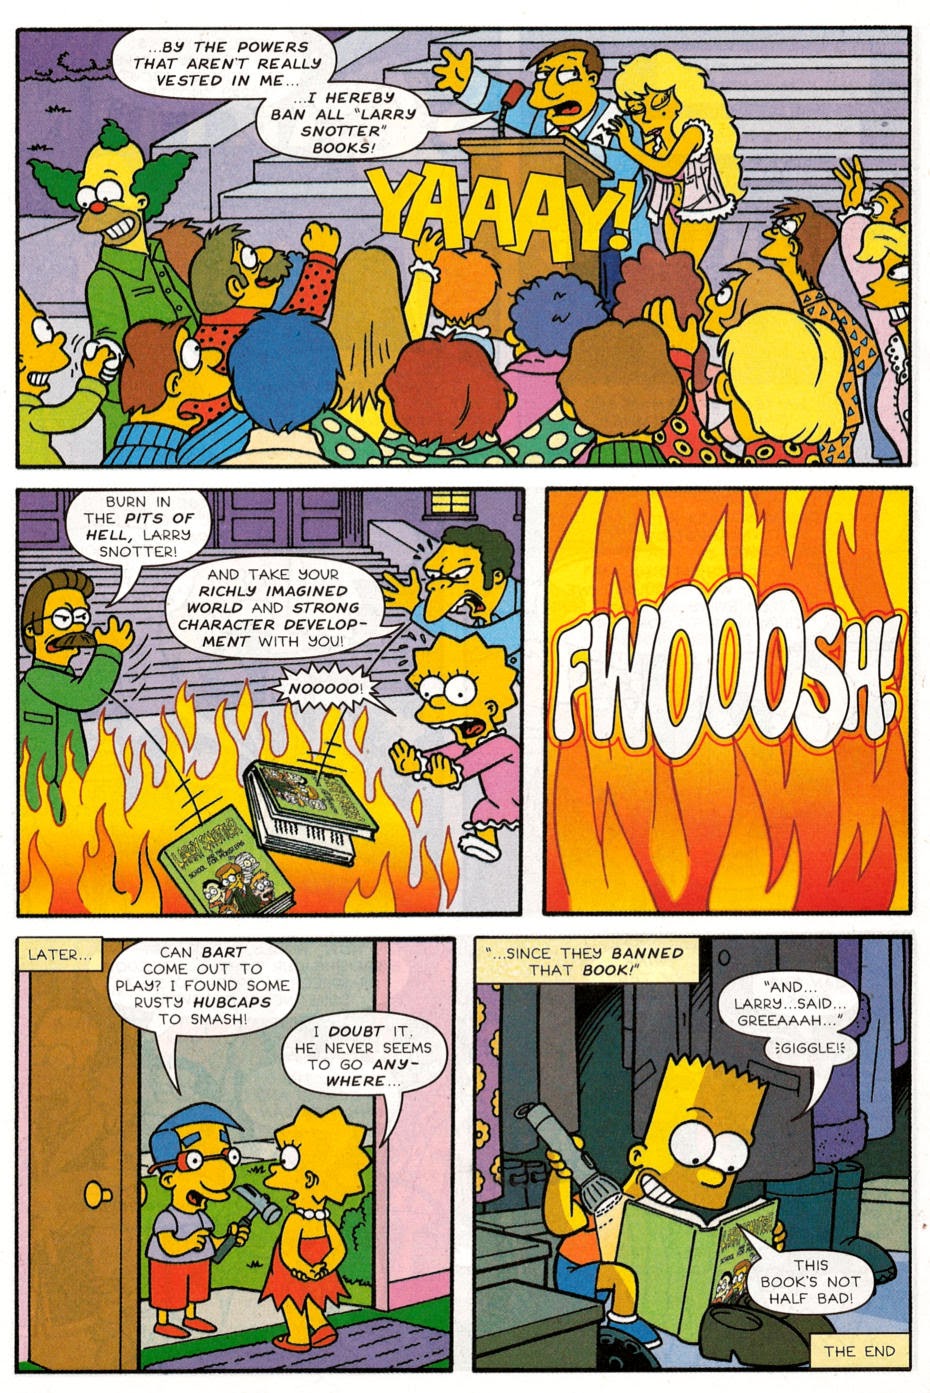 Read online Bart Simpson comic -  Issue #30 - 13